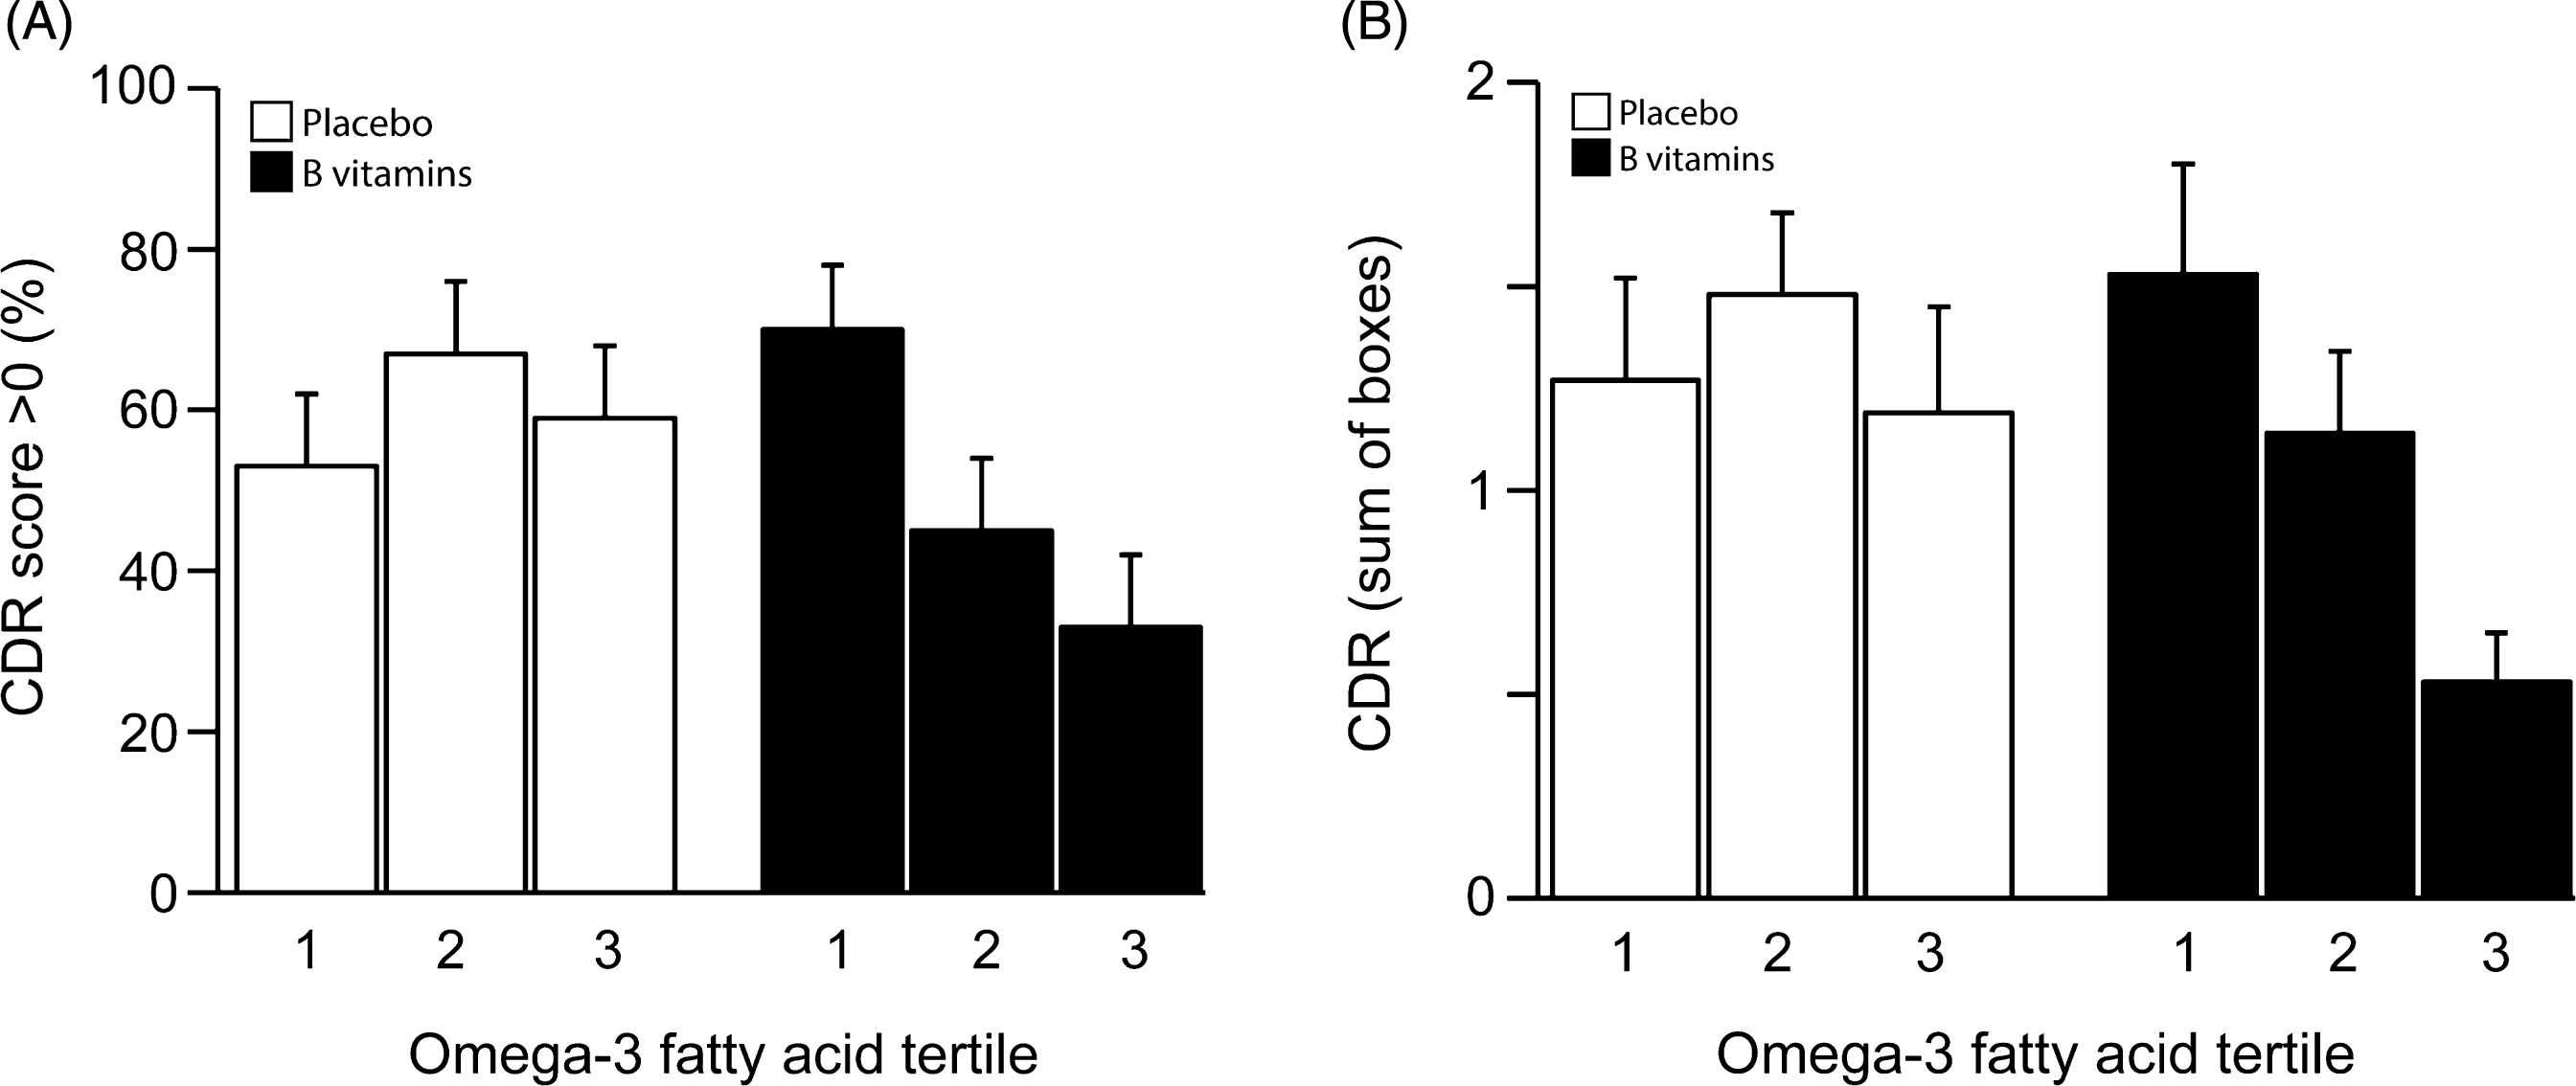 (A) Clinical Dementia Rating score after 2 years according to baseline omega-3 fatty acid concentration. The interaction between omega-3 tertiles and B vitamin treatment did not reach significance (p = 0.13). In the 3rd tertile of combined omega-3 fatty acids, the percent of subjects with CDR >0 was lower in the B vitamin group than in the placebo group (p = 0.043). See Table 2. Columns show mean scores and error bars indicate SEM. (B) Clinical Dementia Rating sum of boxes score after 2 years according to baseline omega-3 fatty acid concentration. The interaction between omega-3 tertiles and B vitamin treatment was not significant (p = 0.35). In the 3rd tertile of combined omega-3 fatty acids, the CDRsob score was lower in the B vitamin group than in the placebo group (p = 0.040). See Table 2. Columns show mean scores and error bars indicate SEM.